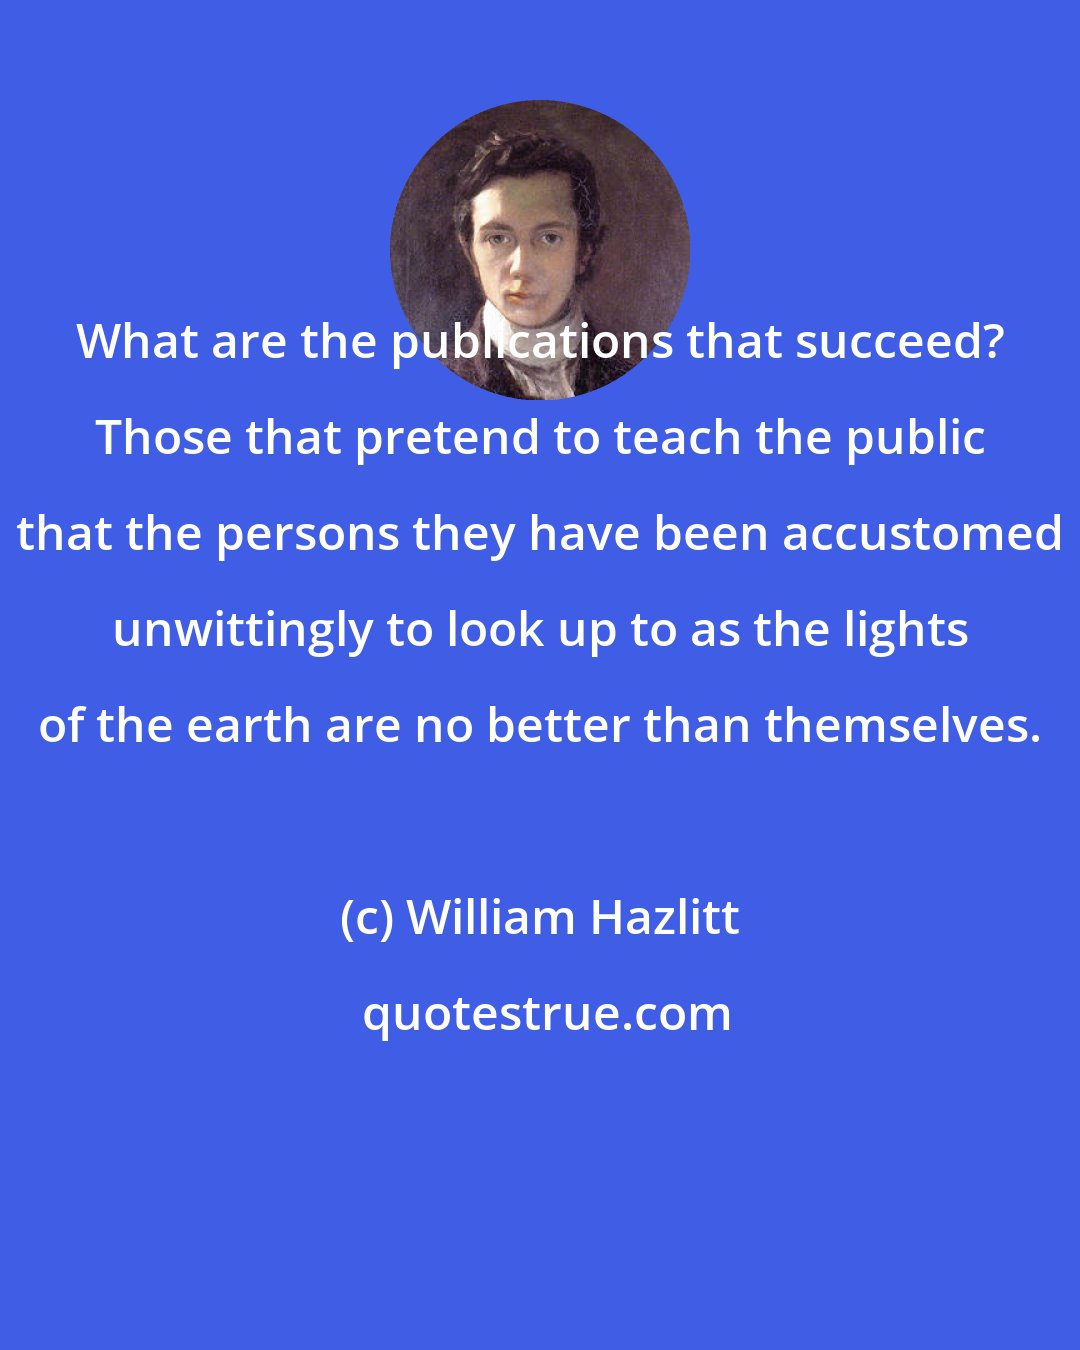 William Hazlitt: What are the publications that succeed? Those that pretend to teach the public that the persons they have been accustomed unwittingly to look up to as the lights of the earth are no better than themselves.